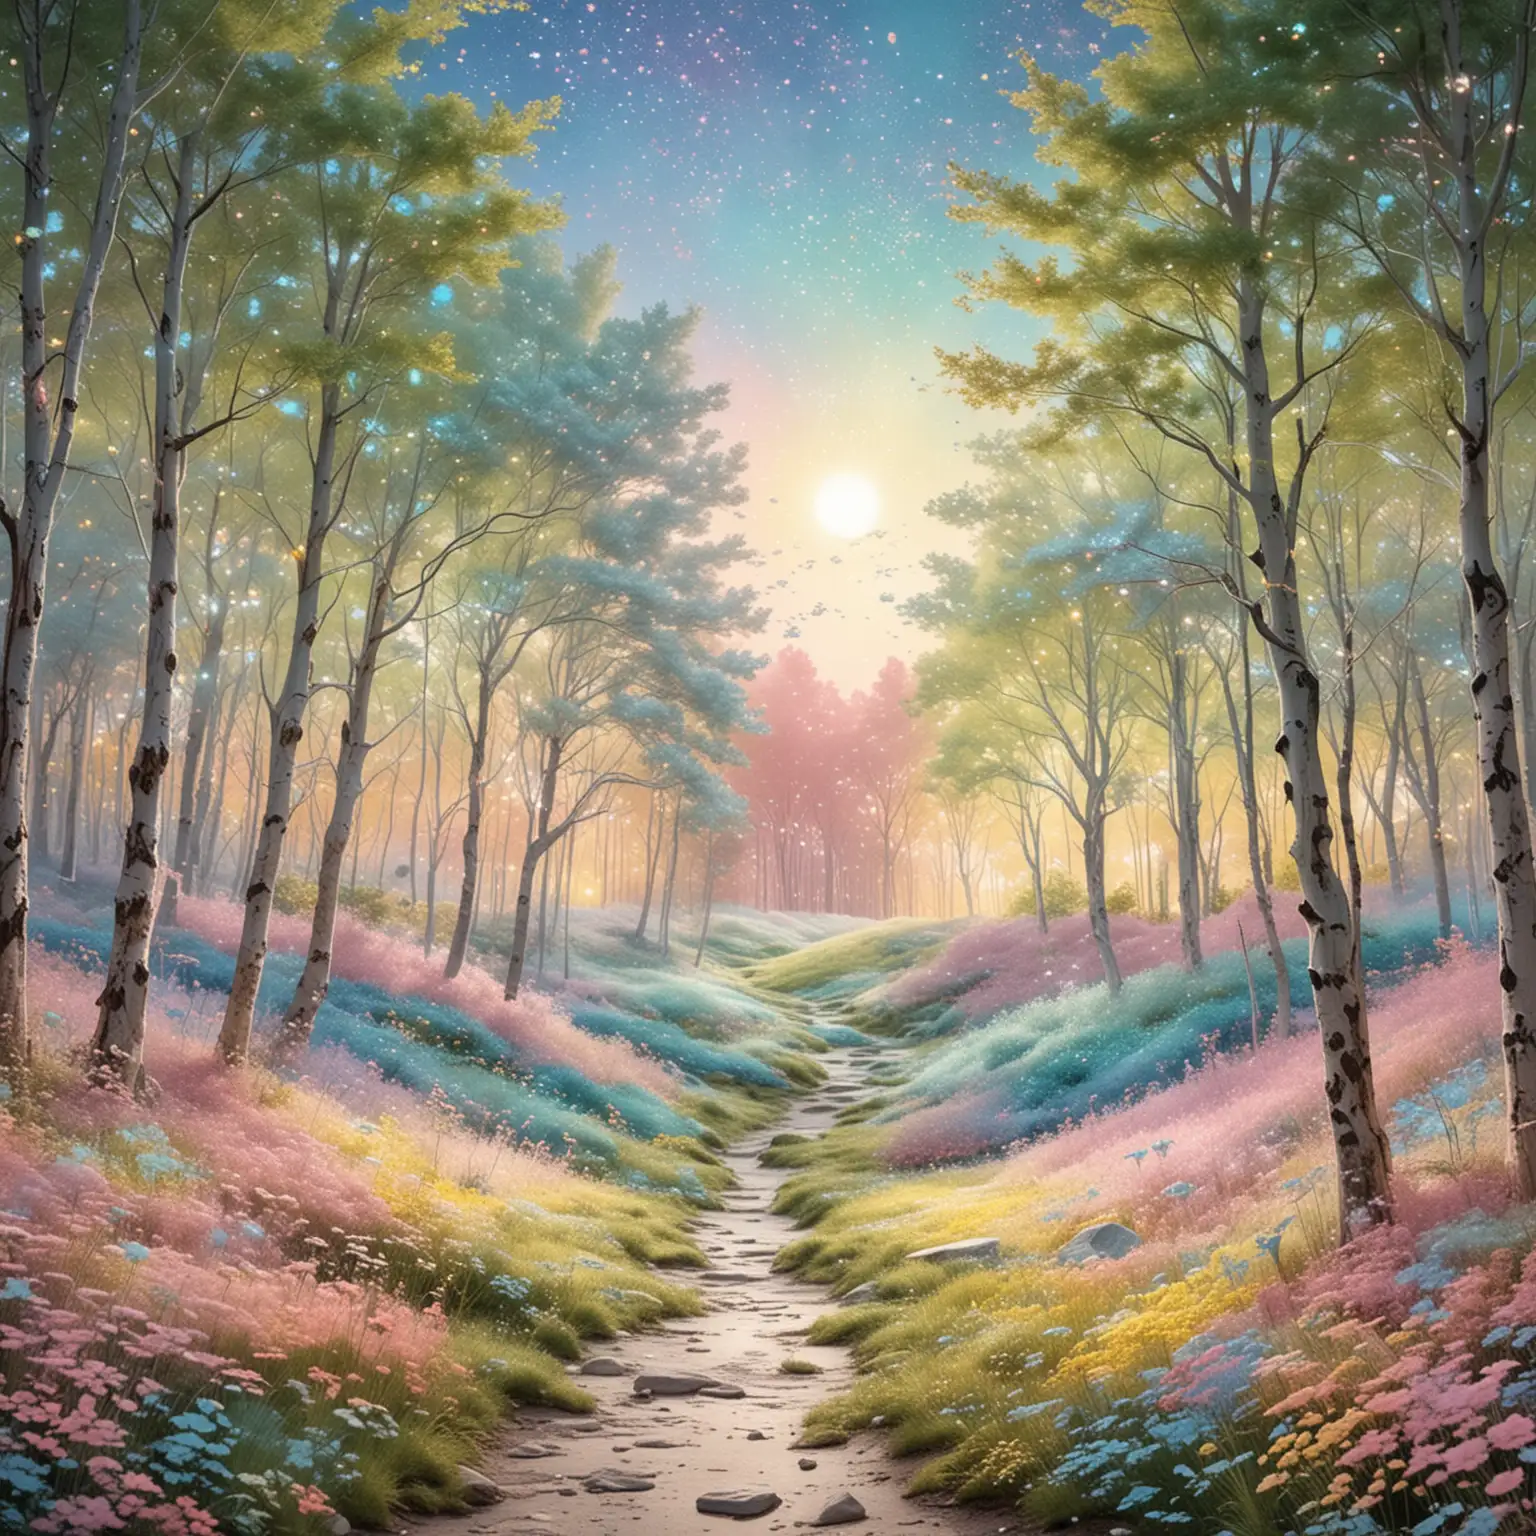 create a galactic playground of hills and trees in iridescent sparkling white, yellow, pink, blue, and green pastels . Make it very light with sunshine